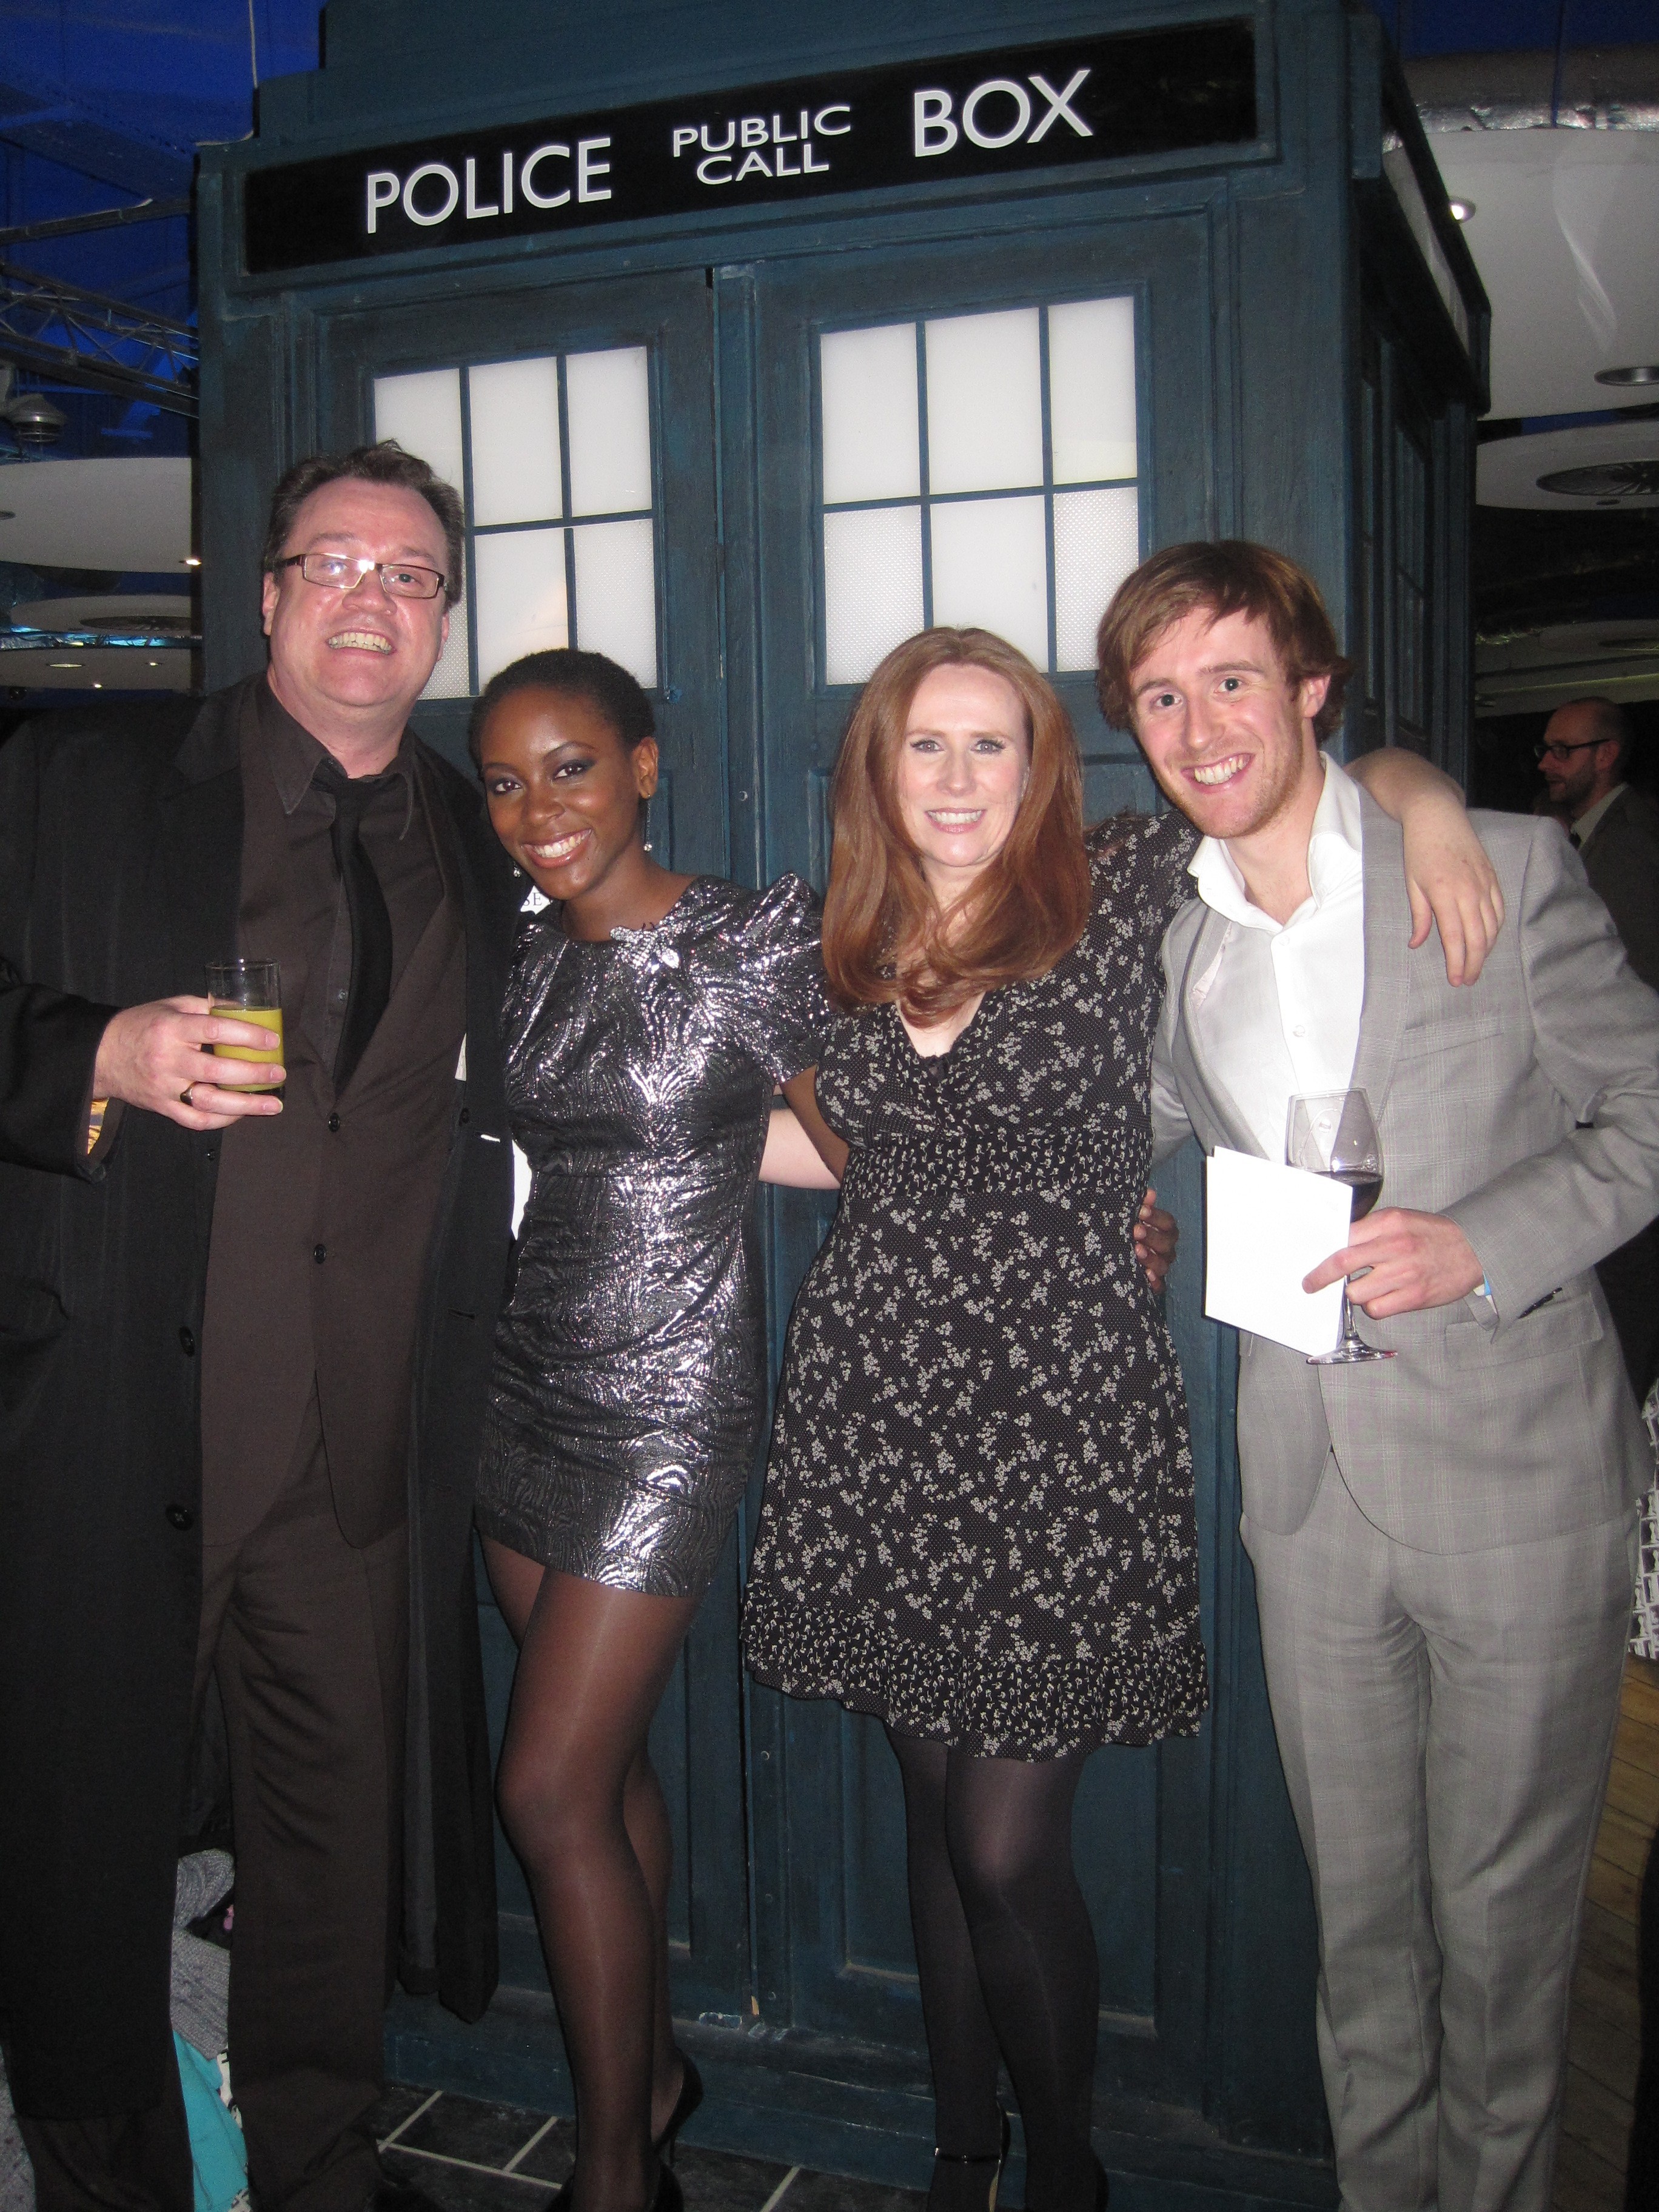 Tracy Ifeachor with Russell T Davies, Catherine Tate and John Heffernan at Dr Who Screening